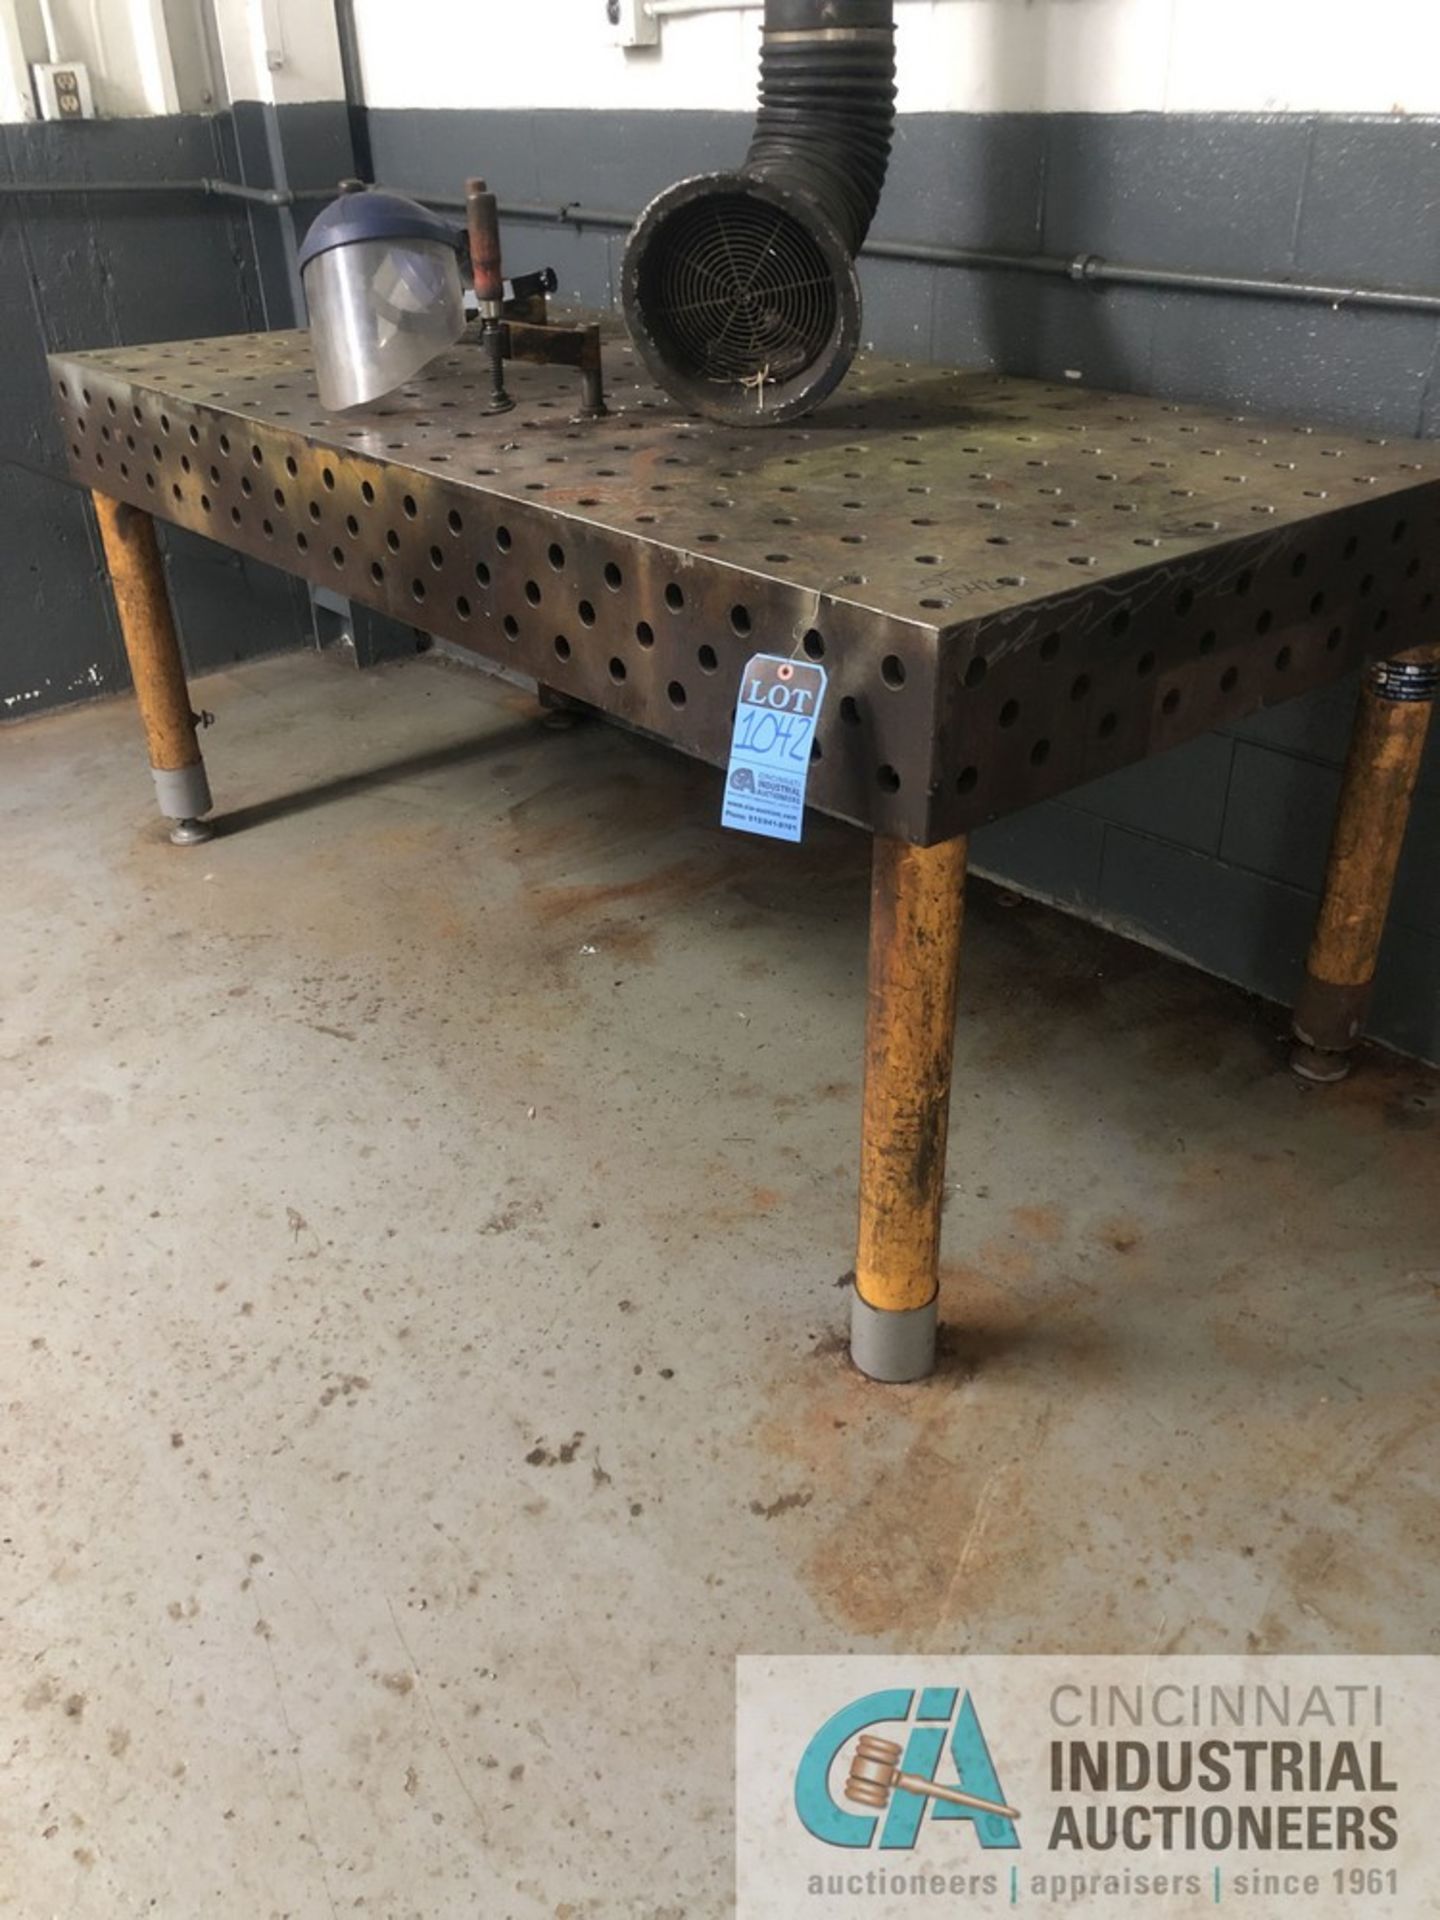 38 1/4” x 78 3/4” x 34 1/2" H DEMMELER WELD TABLE WITH (2) WELD SHIELD HELMETS; 8” THICK TABLE - Image 2 of 7